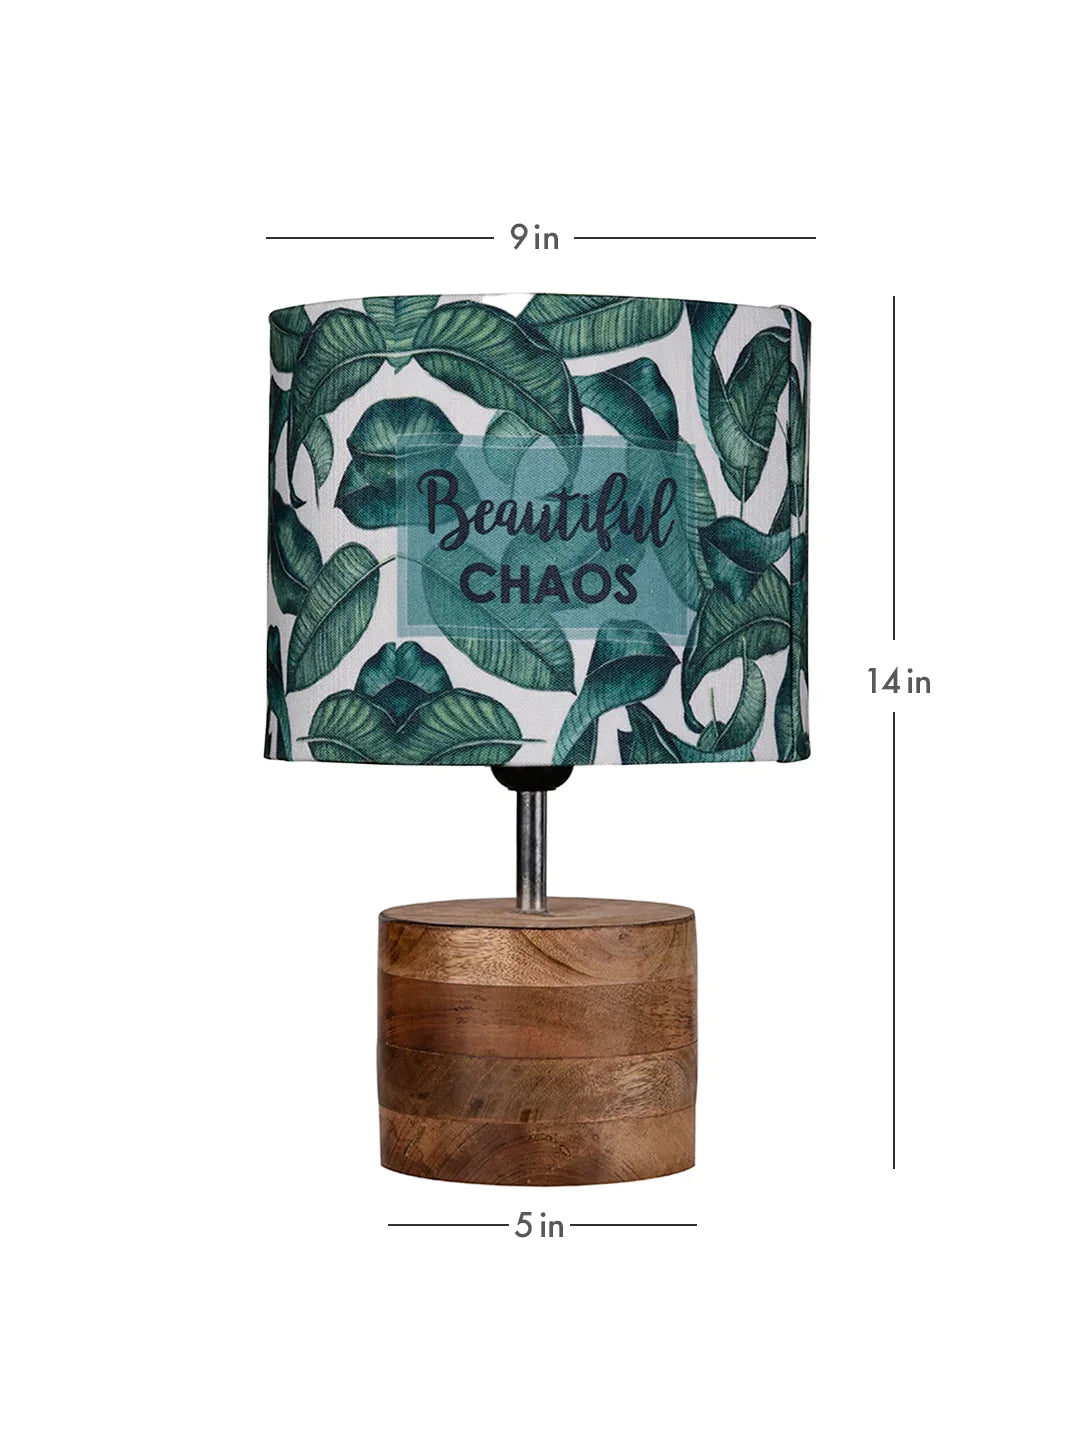 Wooden Brown Log Lamp with Green Chaos Shade